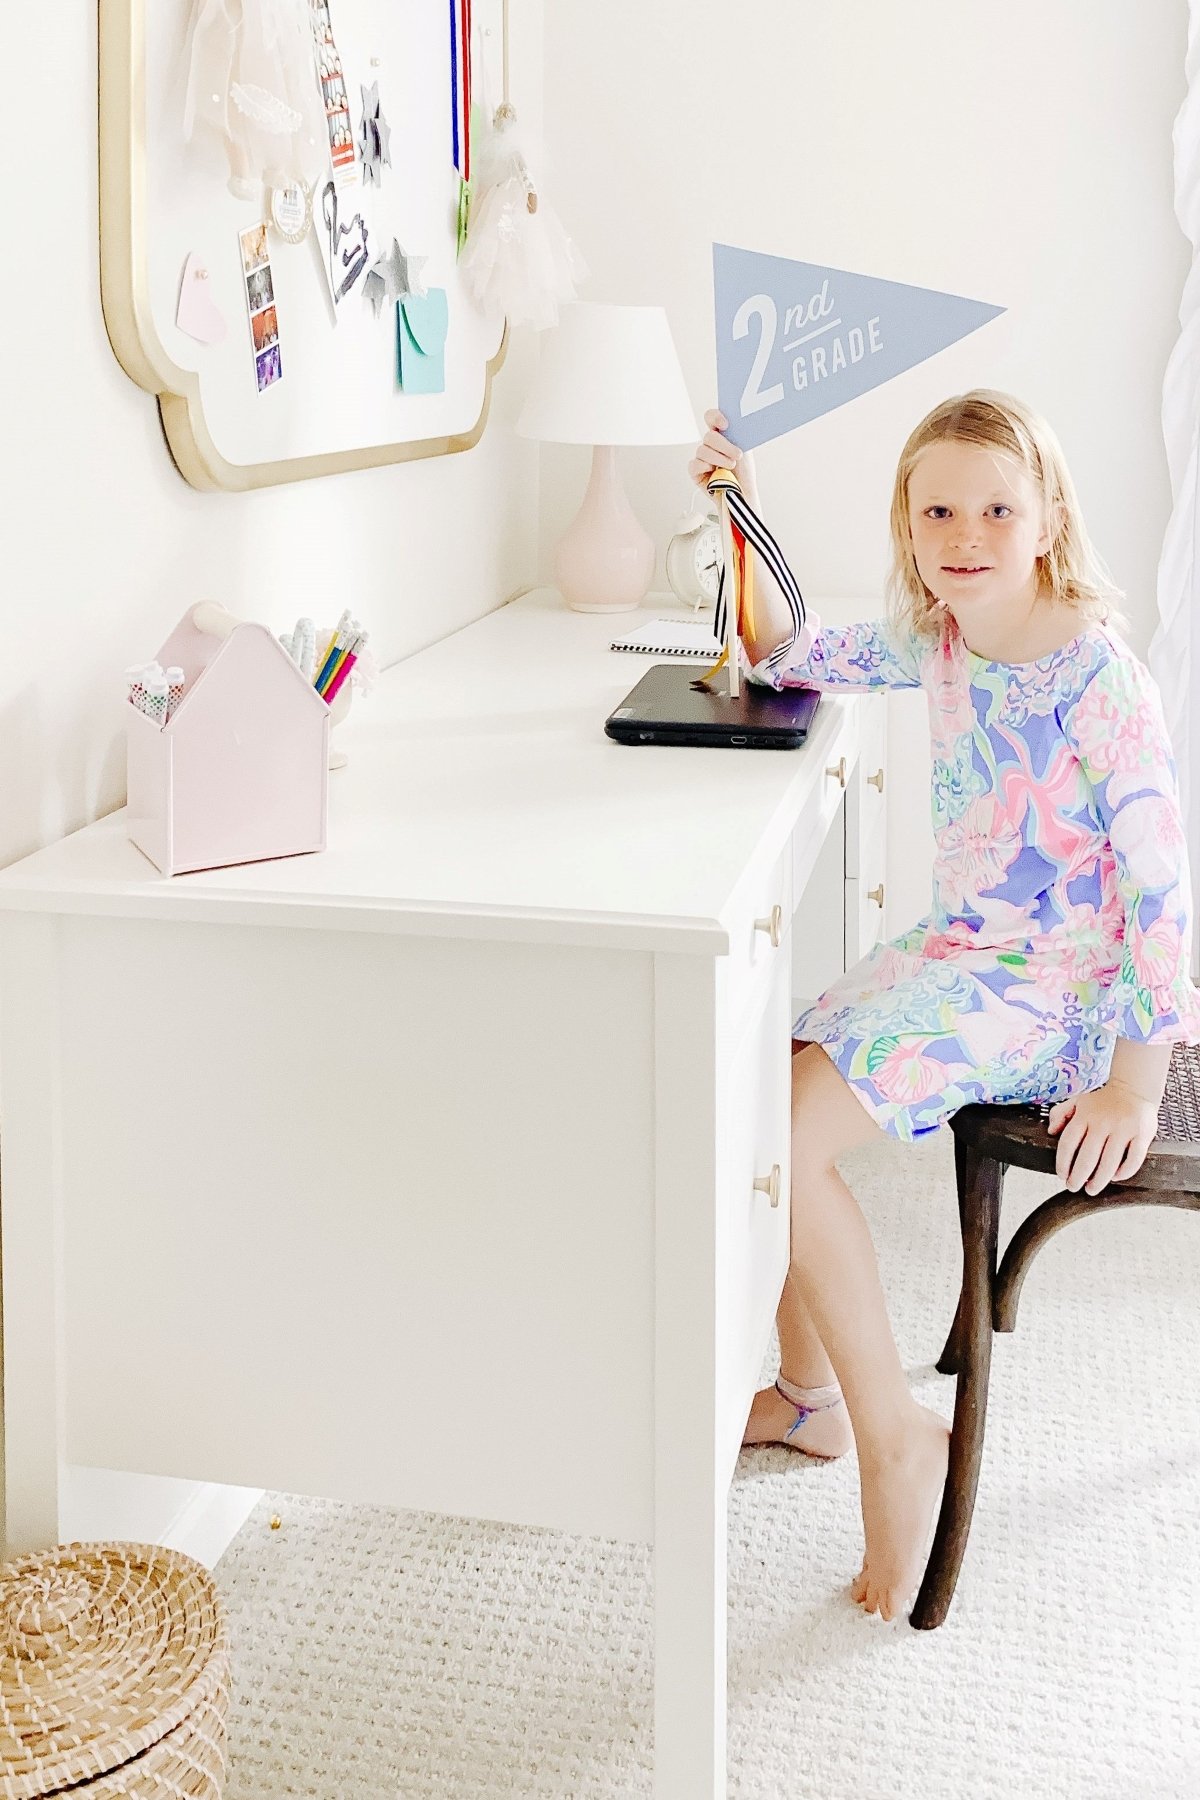 A little blonde girl at a white desk in a white bedroom, holding a flag that says 2nd grade.